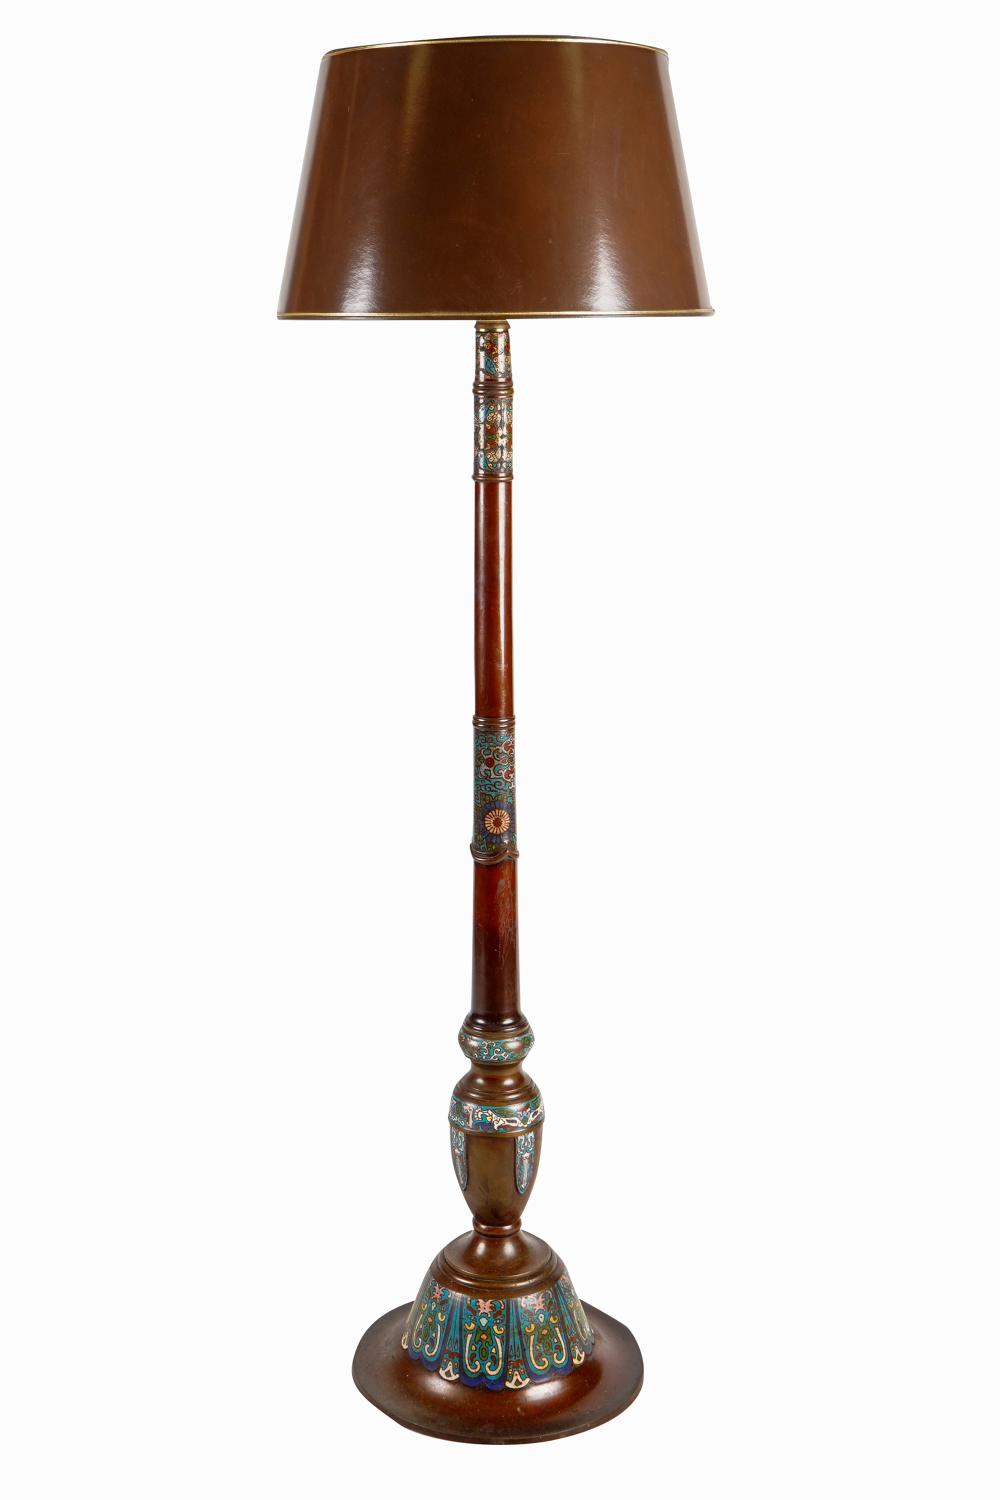 CHAMPLEVE TORCHIERE FLOOR LAMPwith